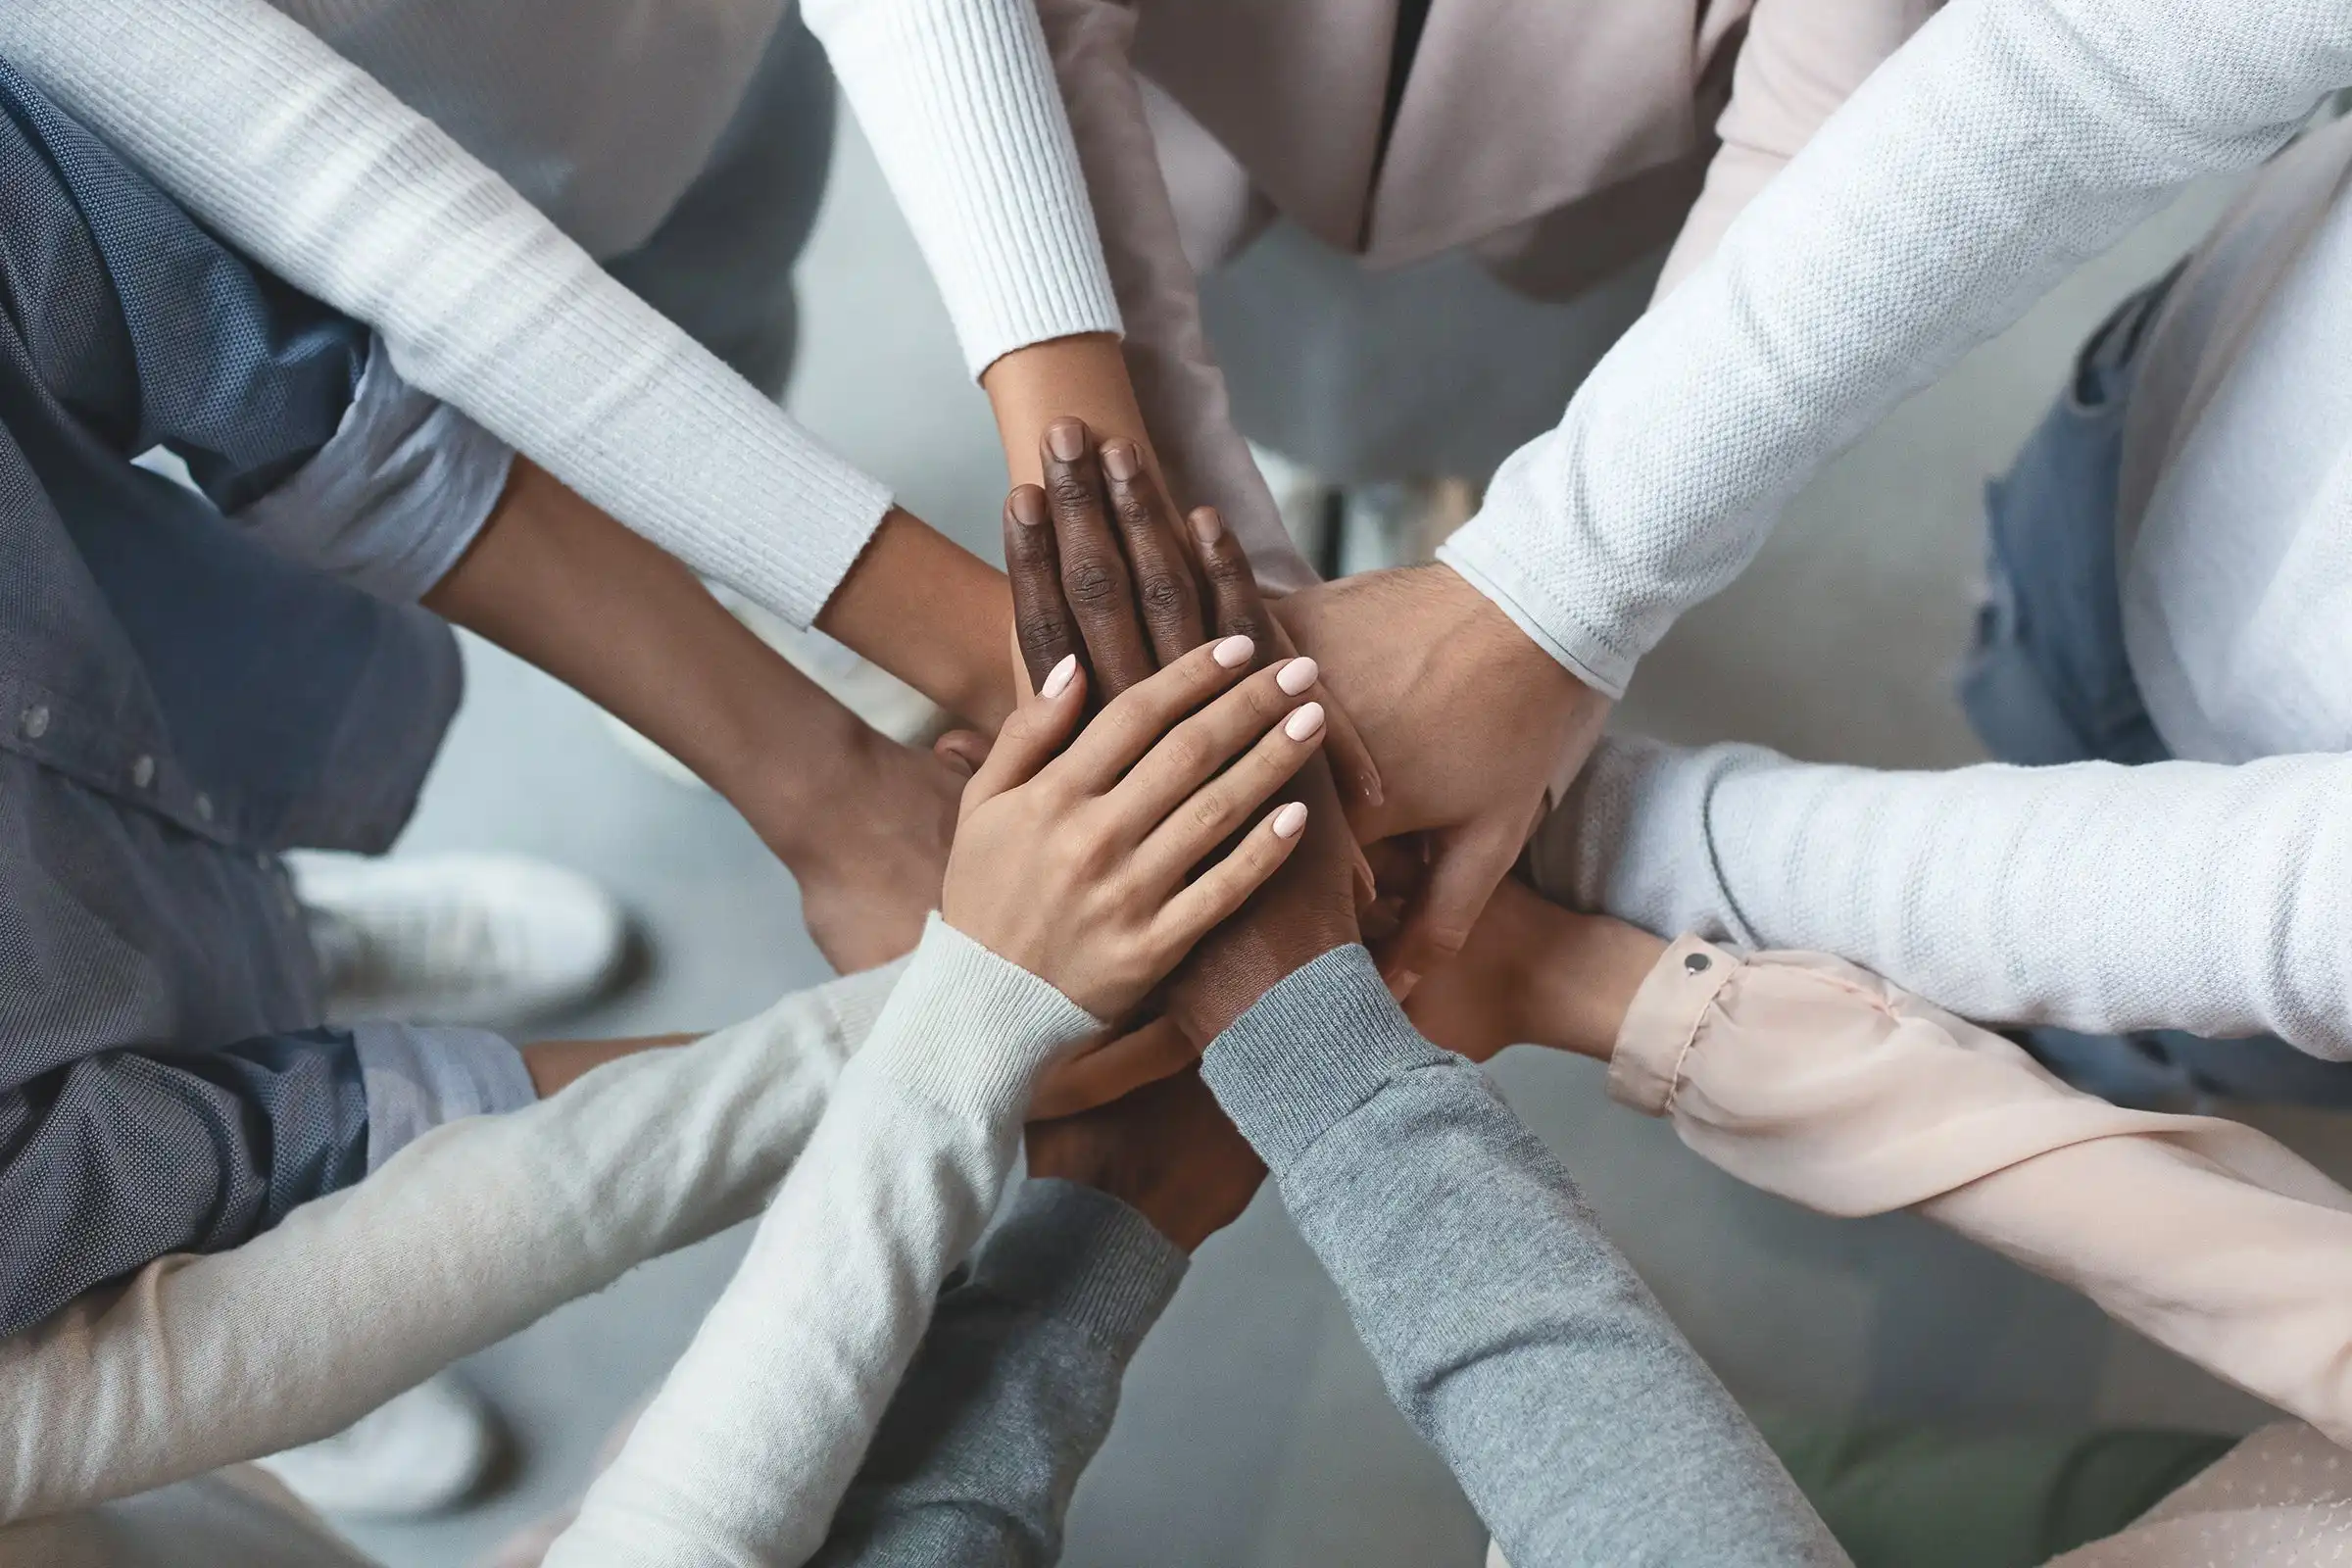 business_team_puts_all_hands_in_for_a_huddle_for_unity_teamwork_team_spirit_trust_diversity_inclusion_by_prostock-studio_gettyimages-1201215883_2400x1600-100859605-orig